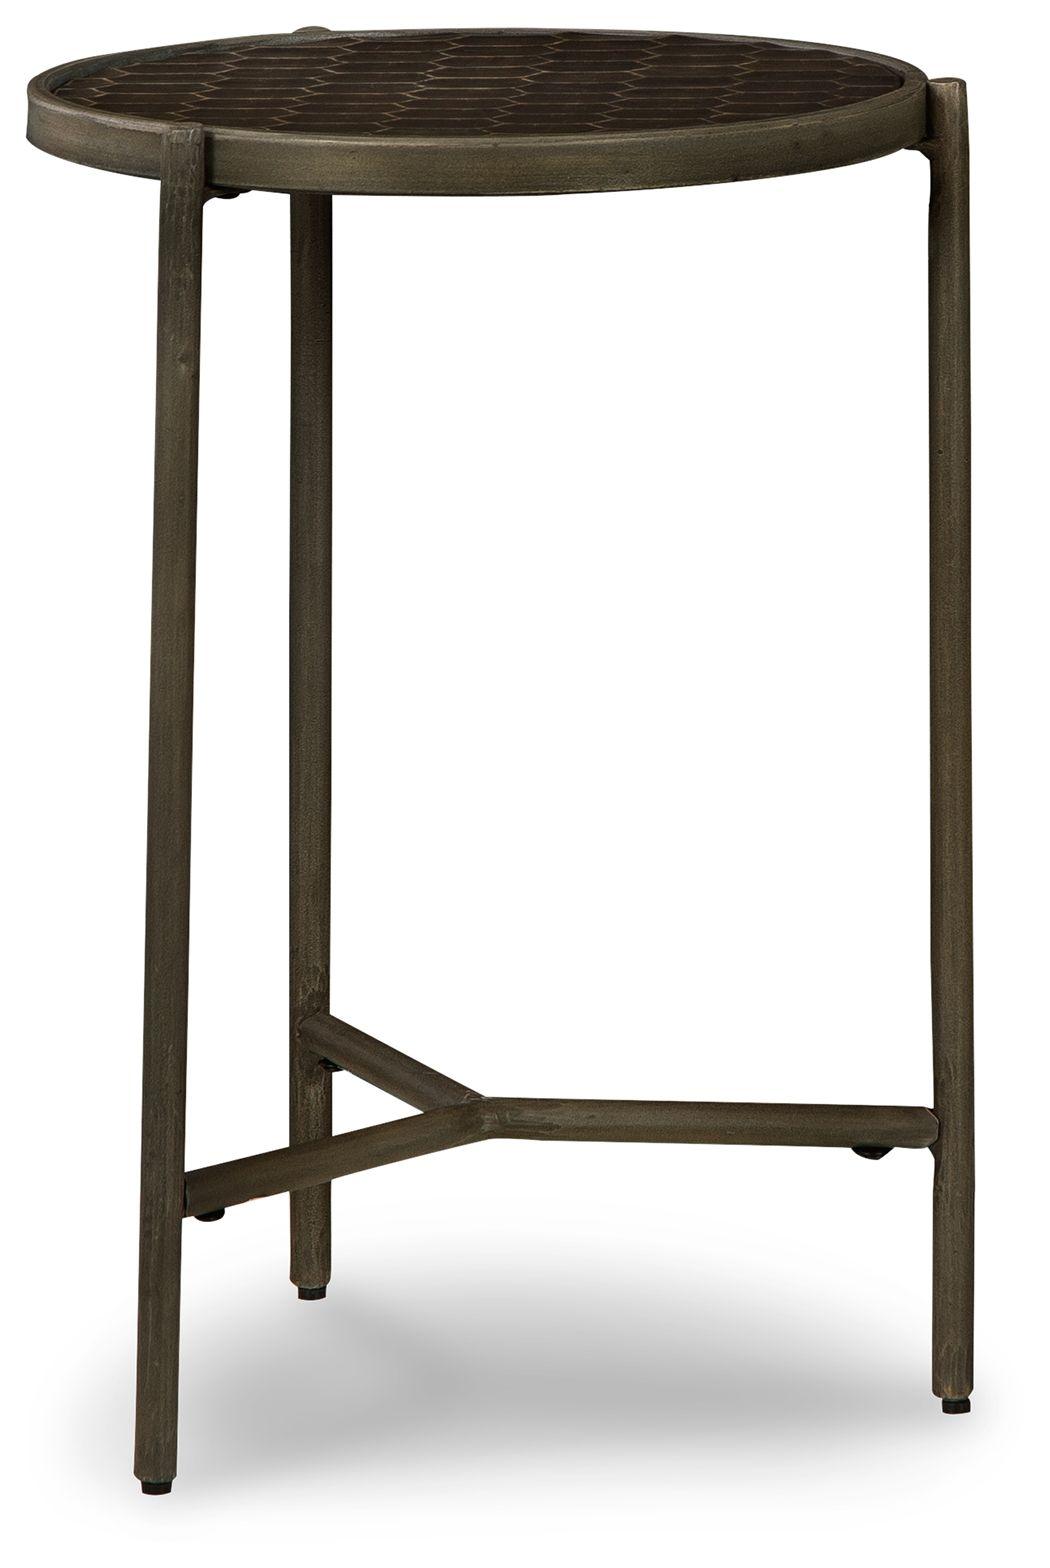 Doraley - Brown / Gray - Round Side End Table Tony's Home Furnishings Furniture. Beds. Dressers. Sofas.